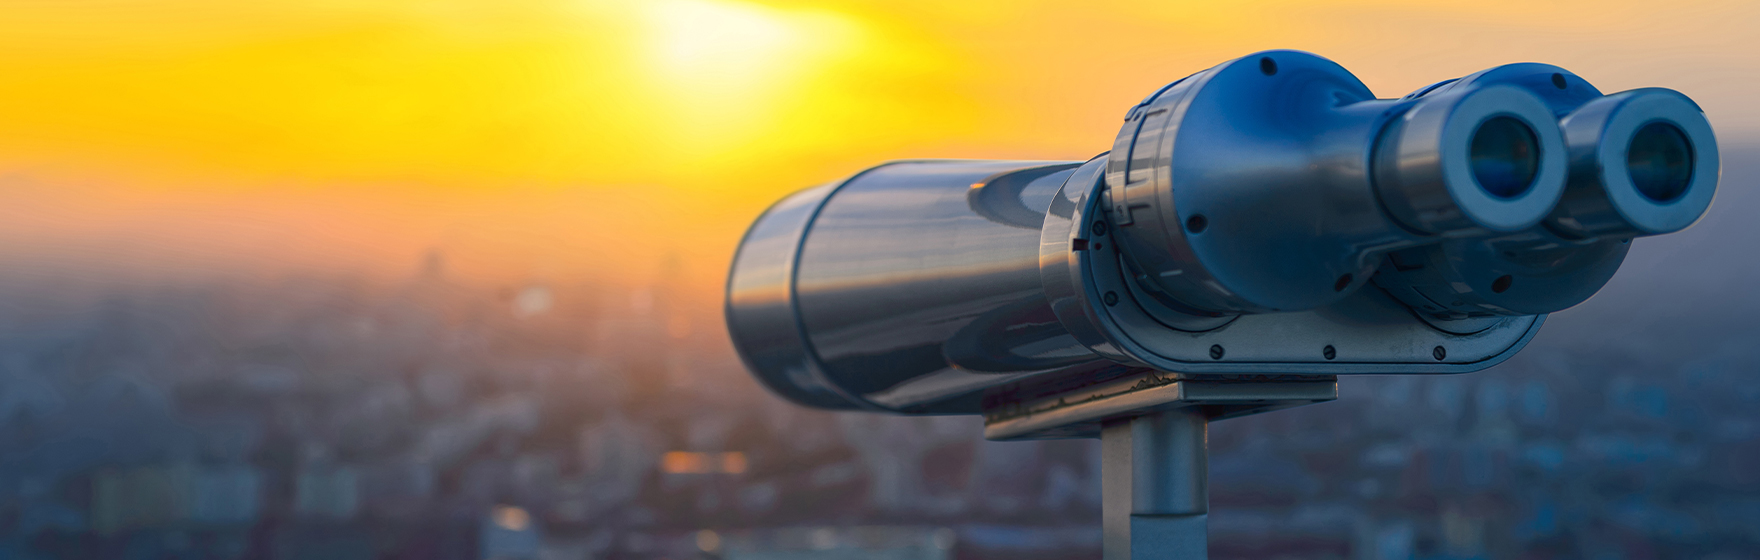 Binoculars or telescope on top of skyscraper at observation deck to admire the city skyline at sunset.